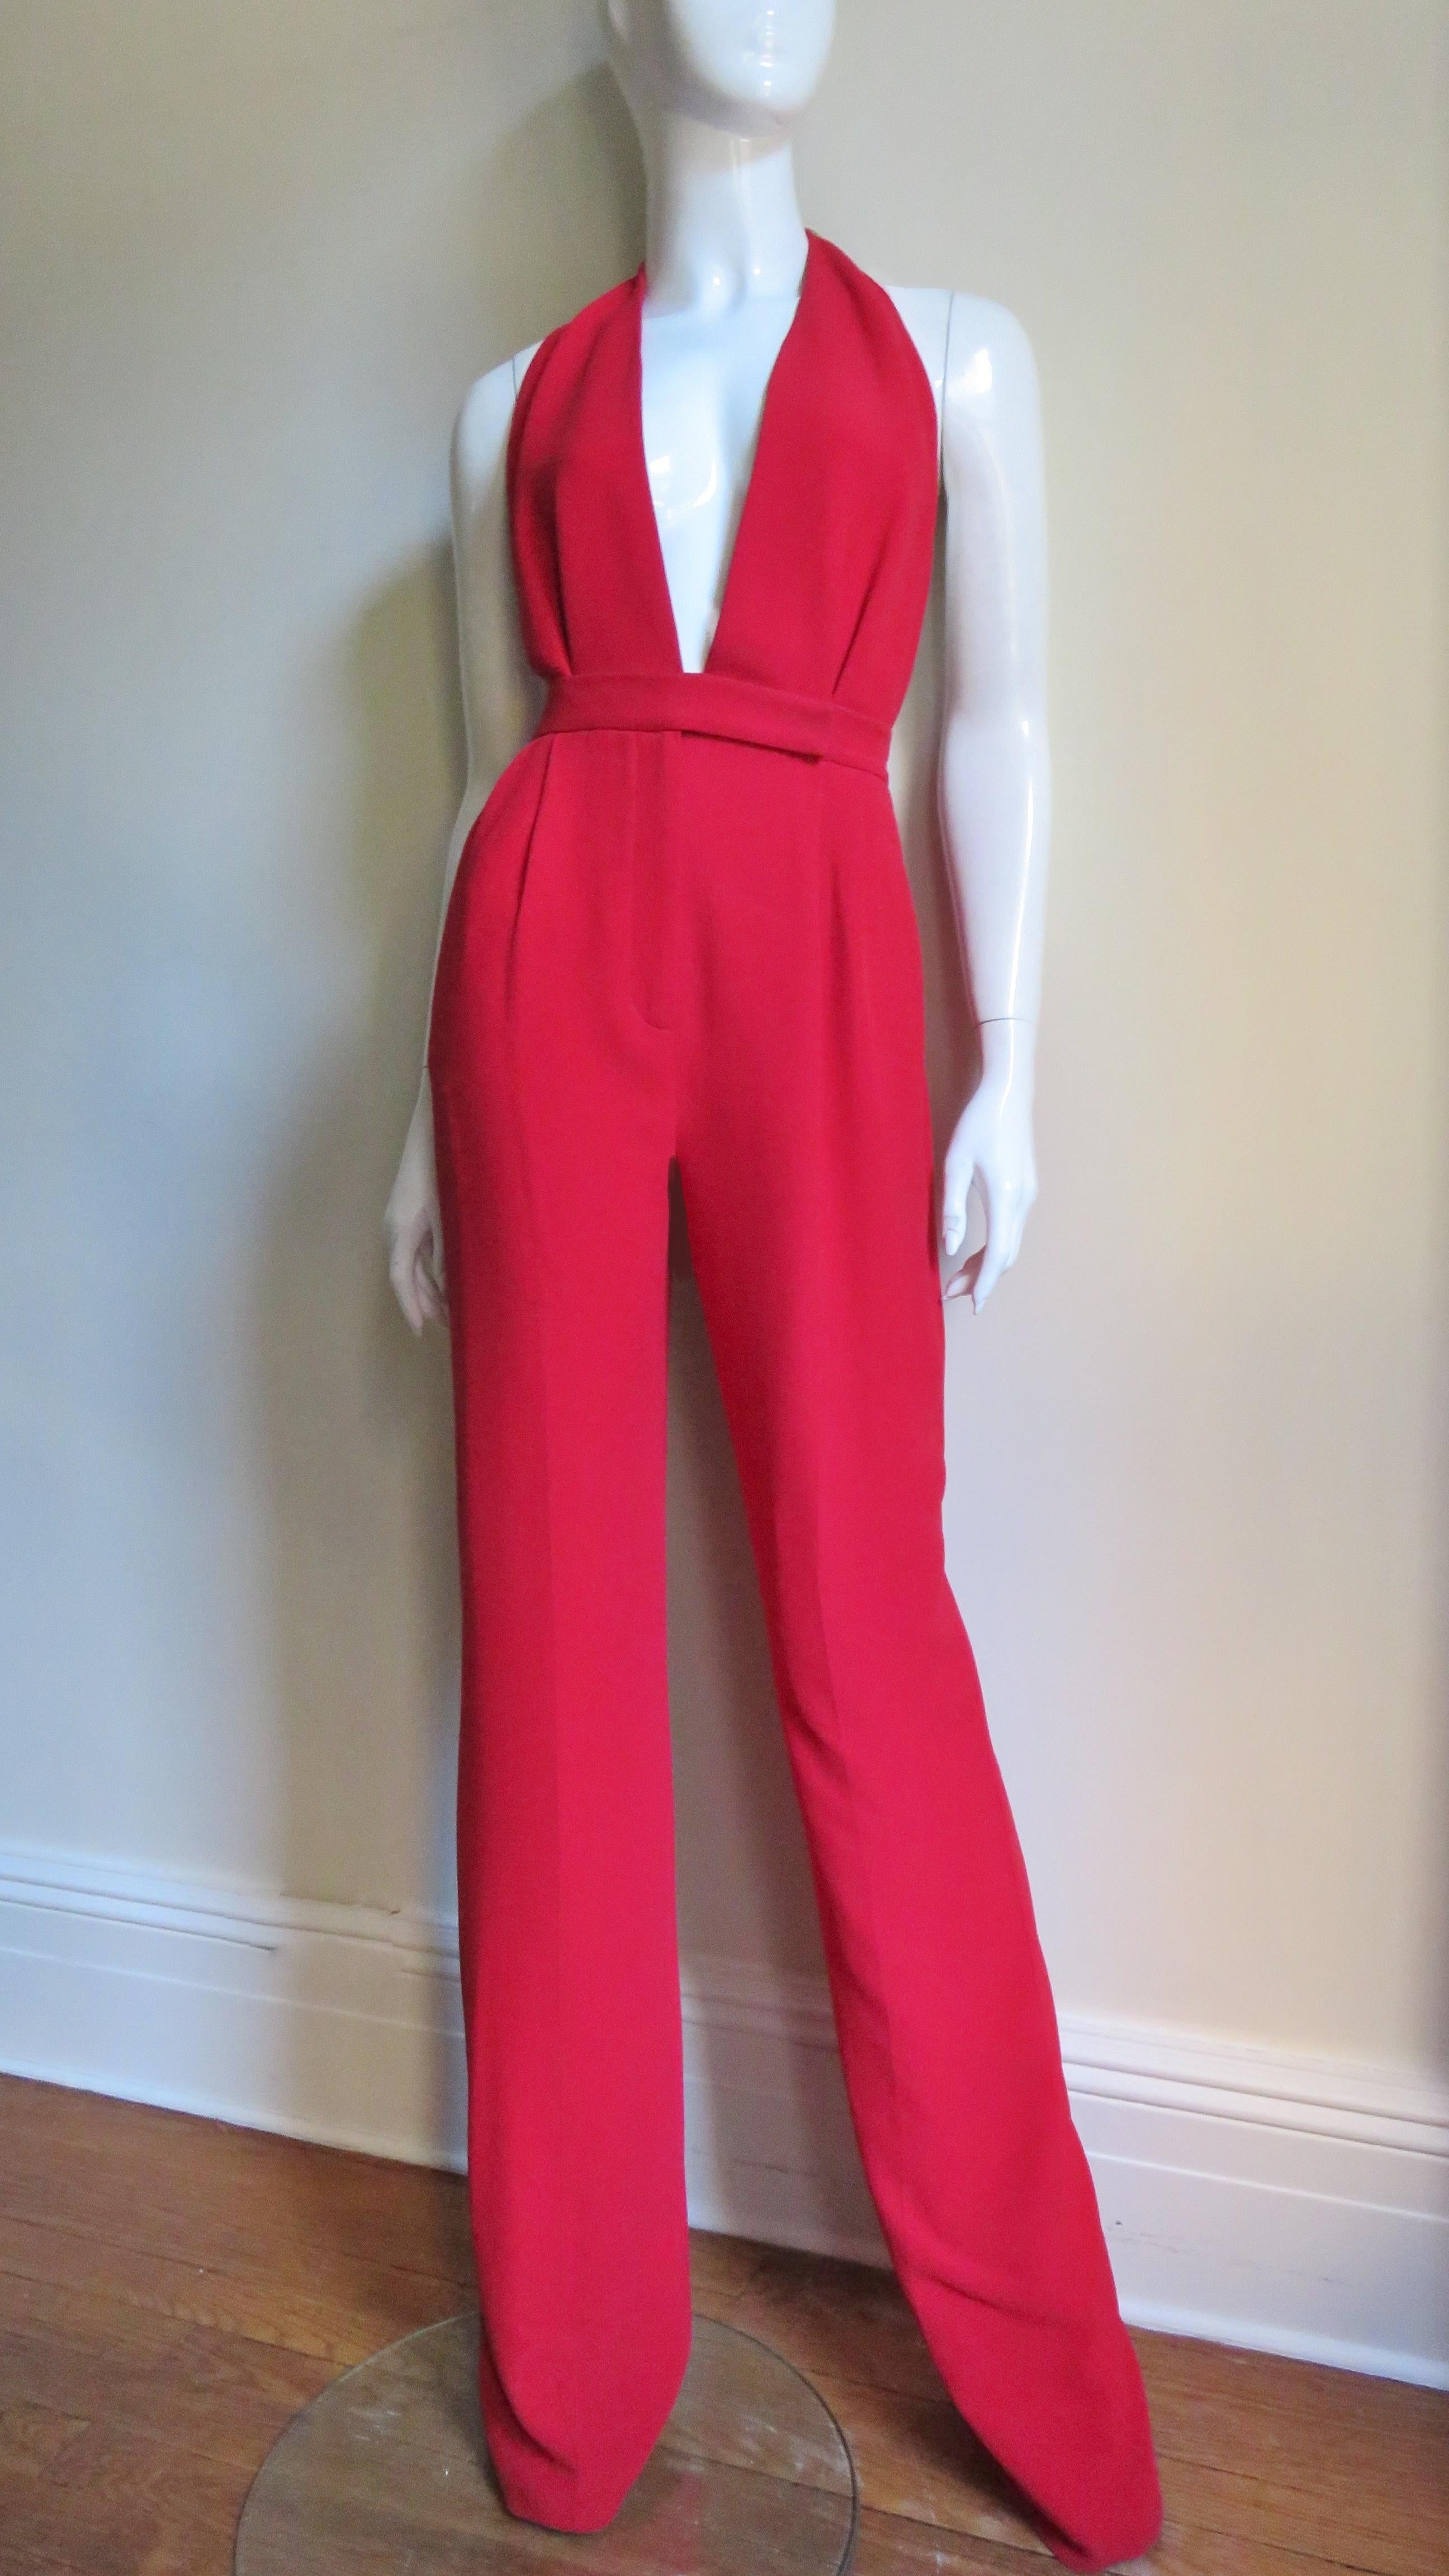 Valentino New Plunging Halter Jumpsuit In Excellent Condition For Sale In Water Mill, NY